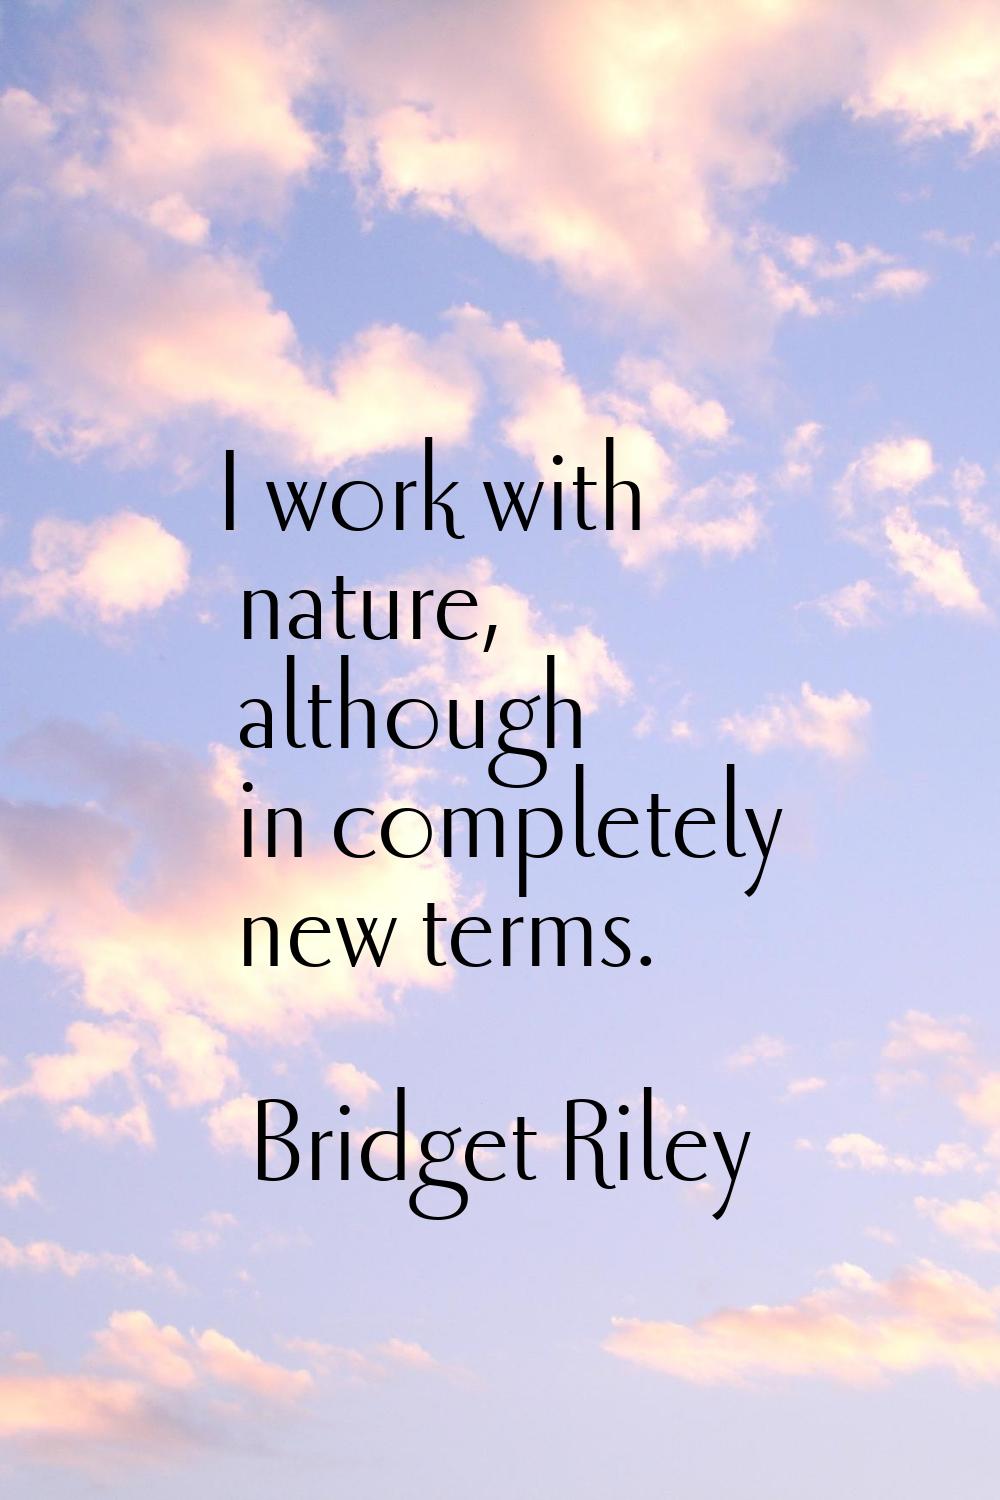 I work with nature, although in completely new terms.